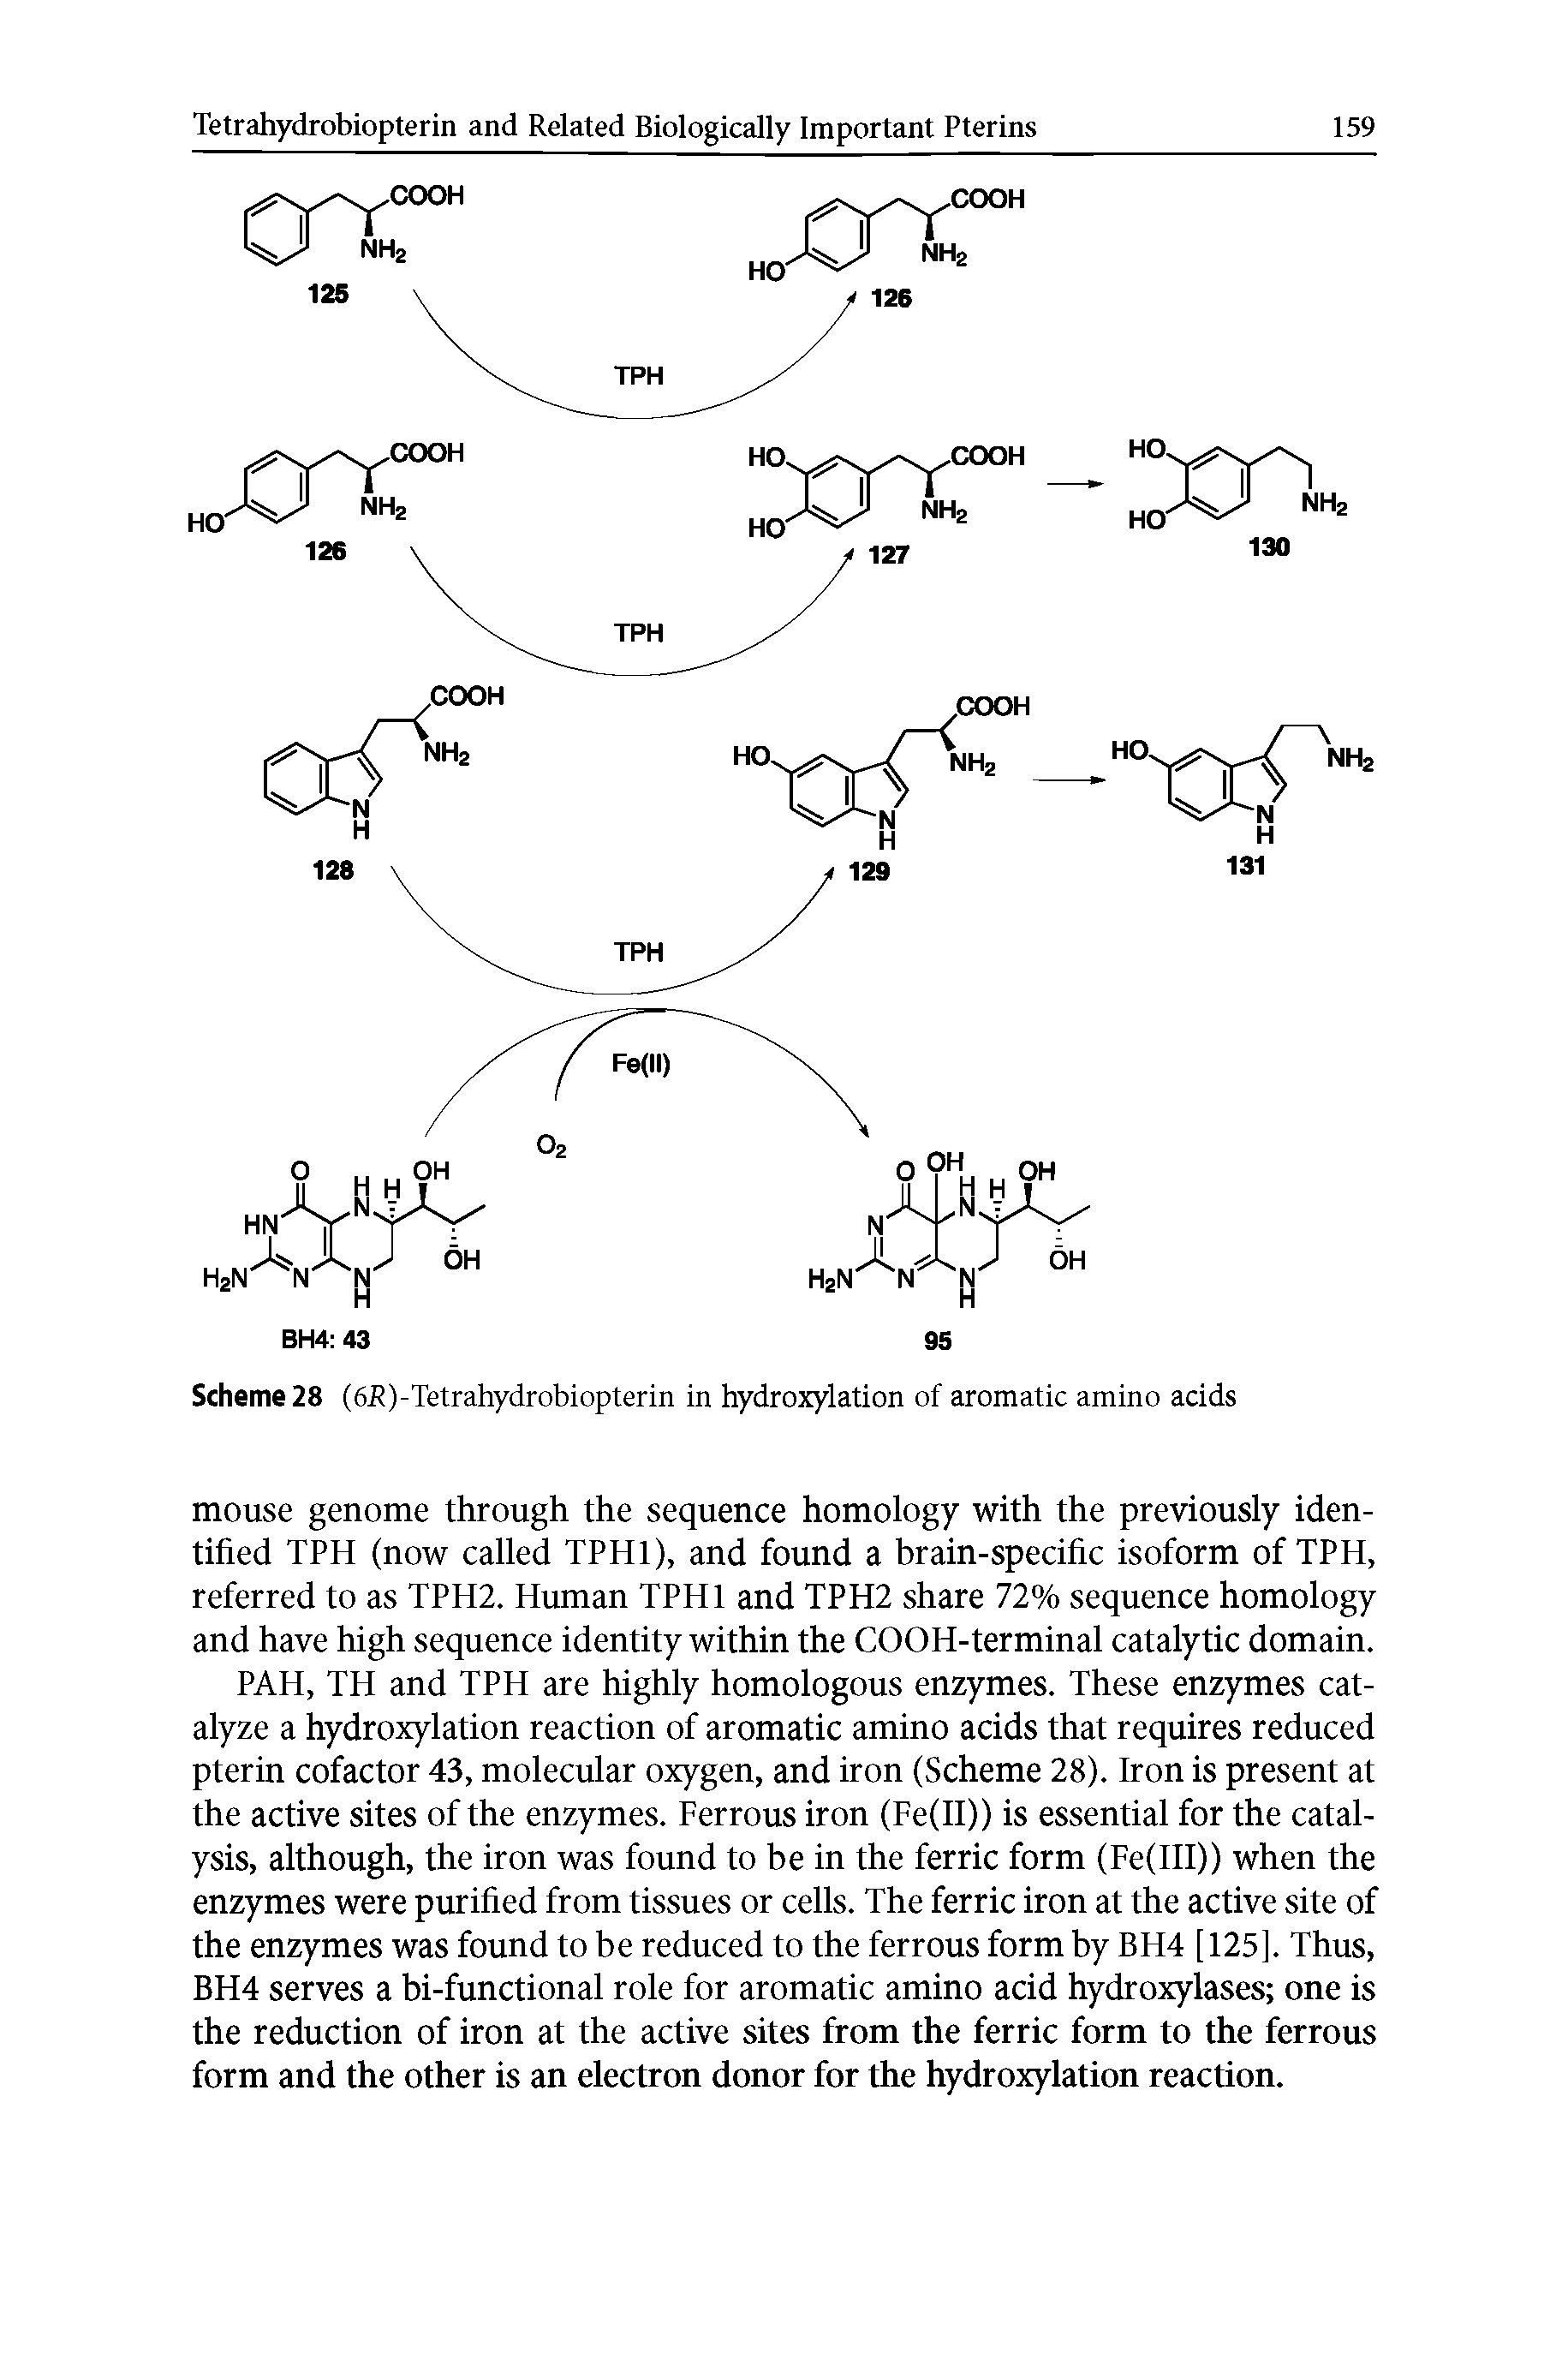 Scheme 28 (6R)-Tetrahydrobiopterin in hydroxylation of aromatic amino acids...